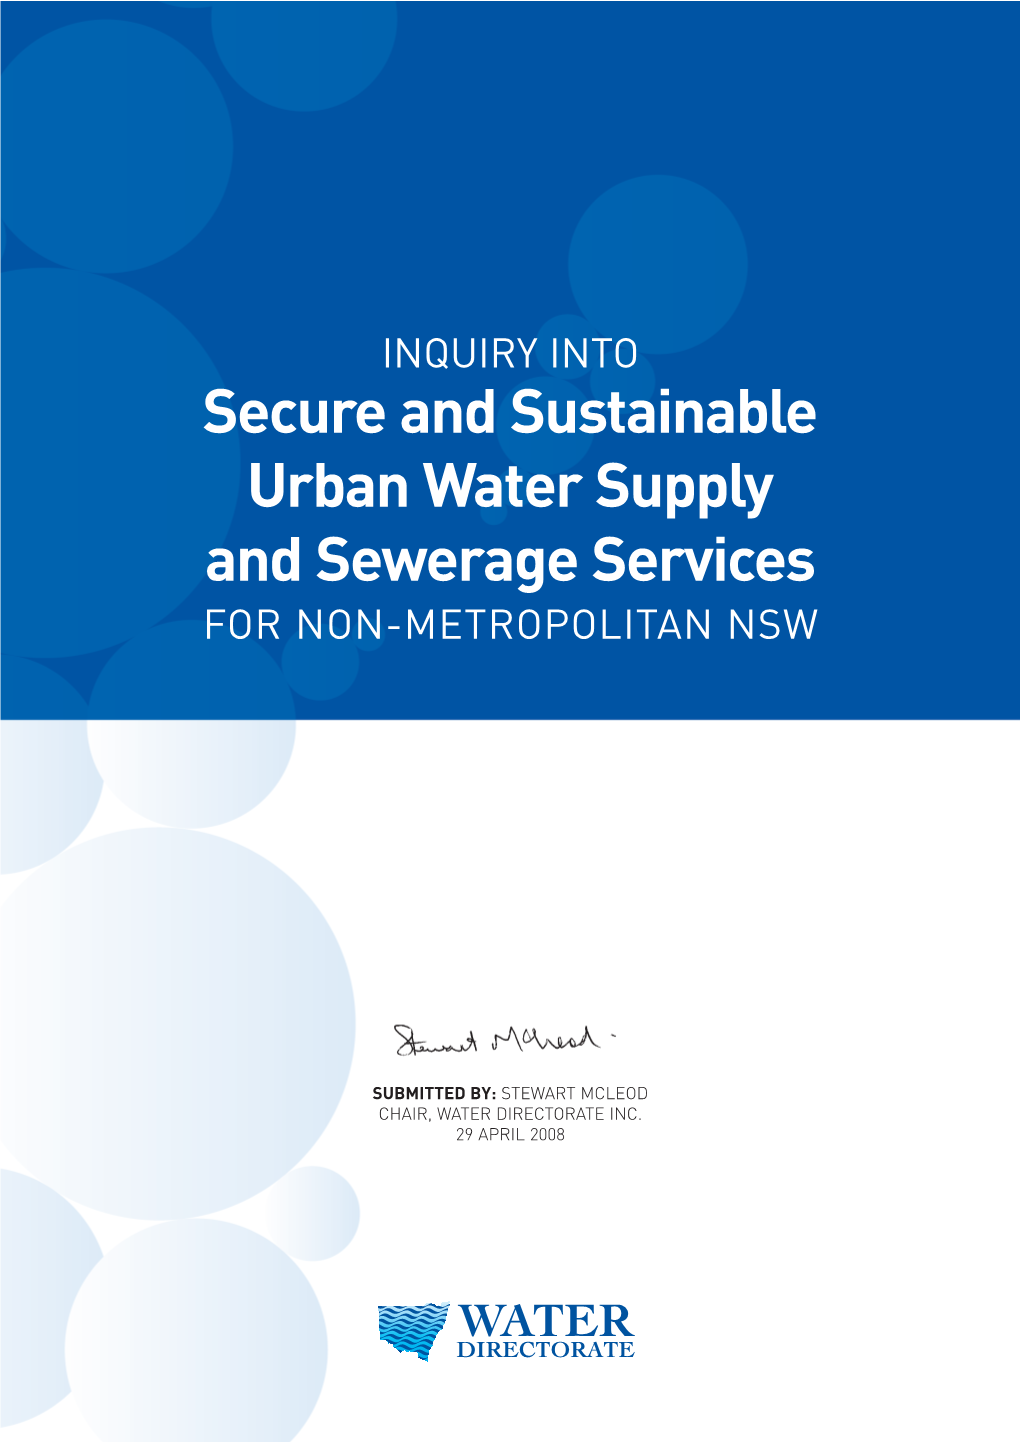 Secure and Sustainable Urban Water Supply and Sewerage Services for NON-METROPOLITAN NSW